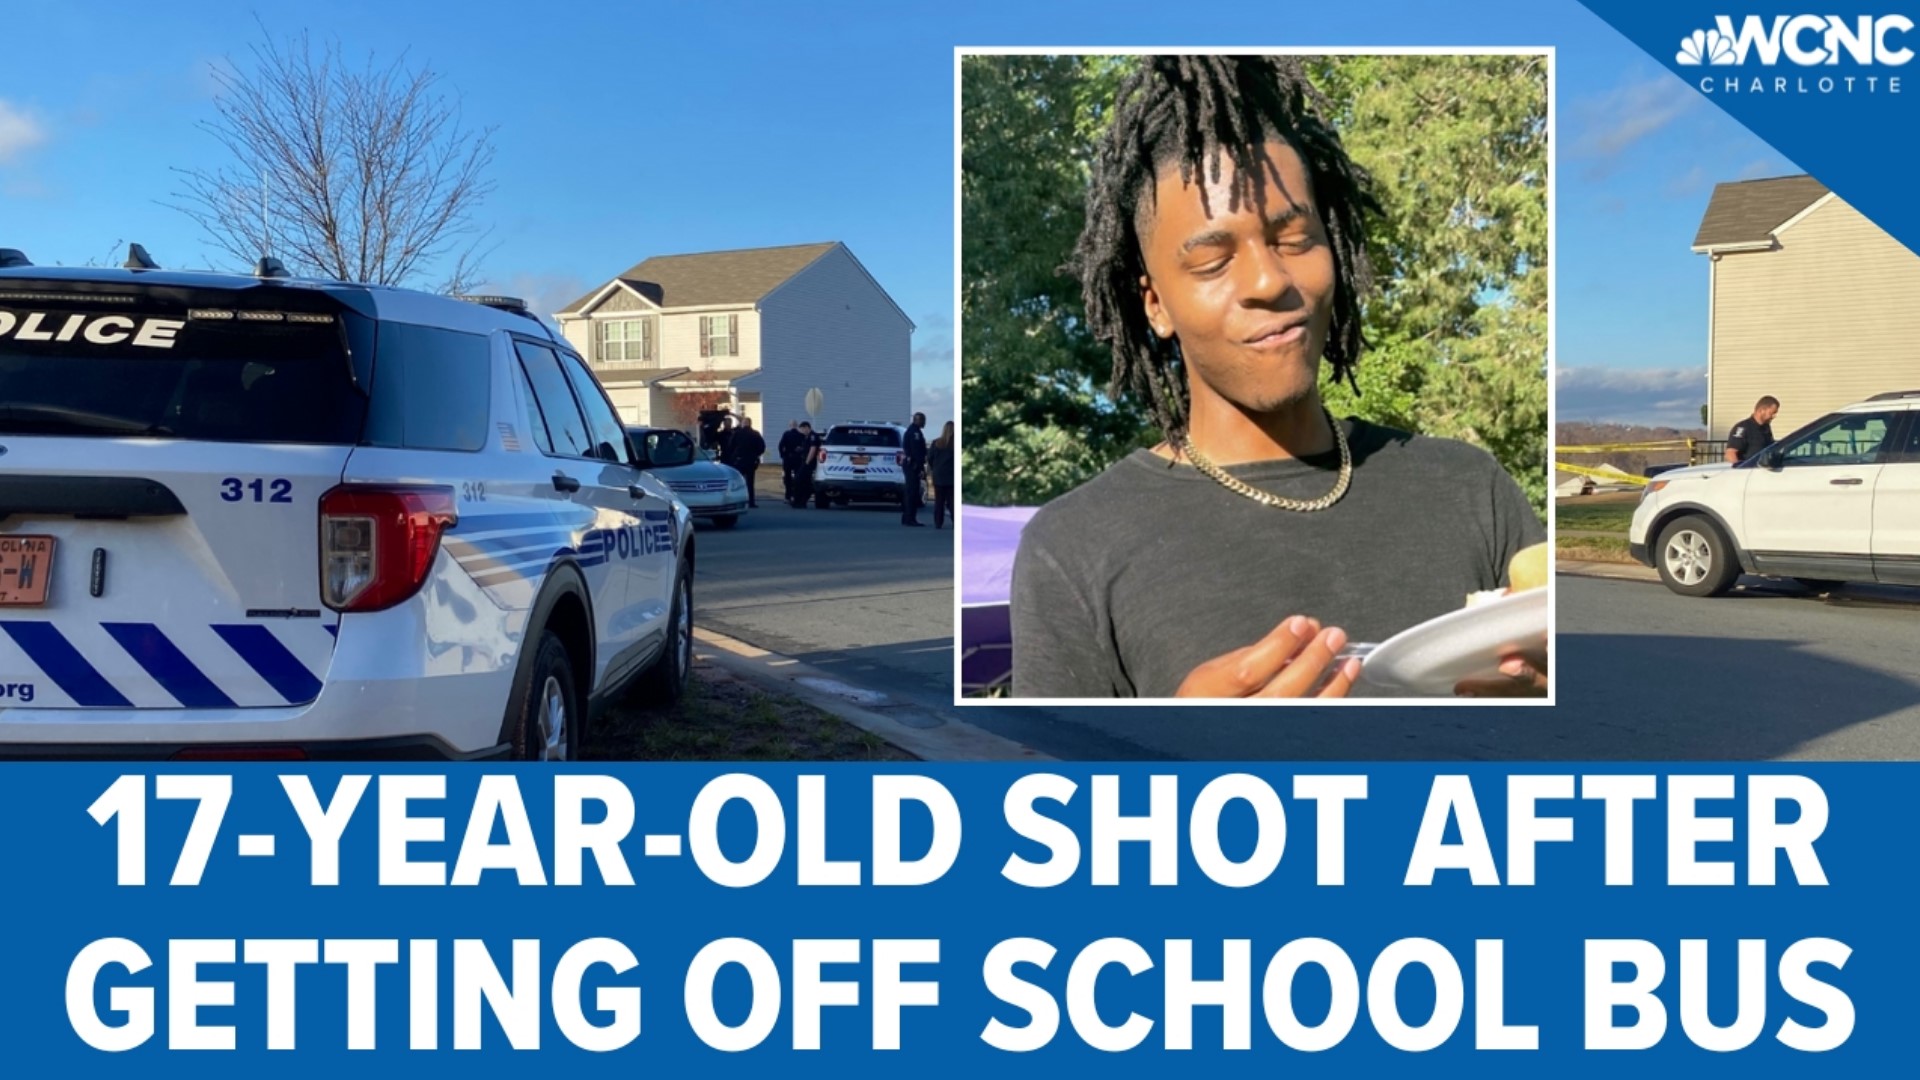 A 17-year-old Charlotte Mecklenburg Schools student was hospitalized after being shot on Wednesday.